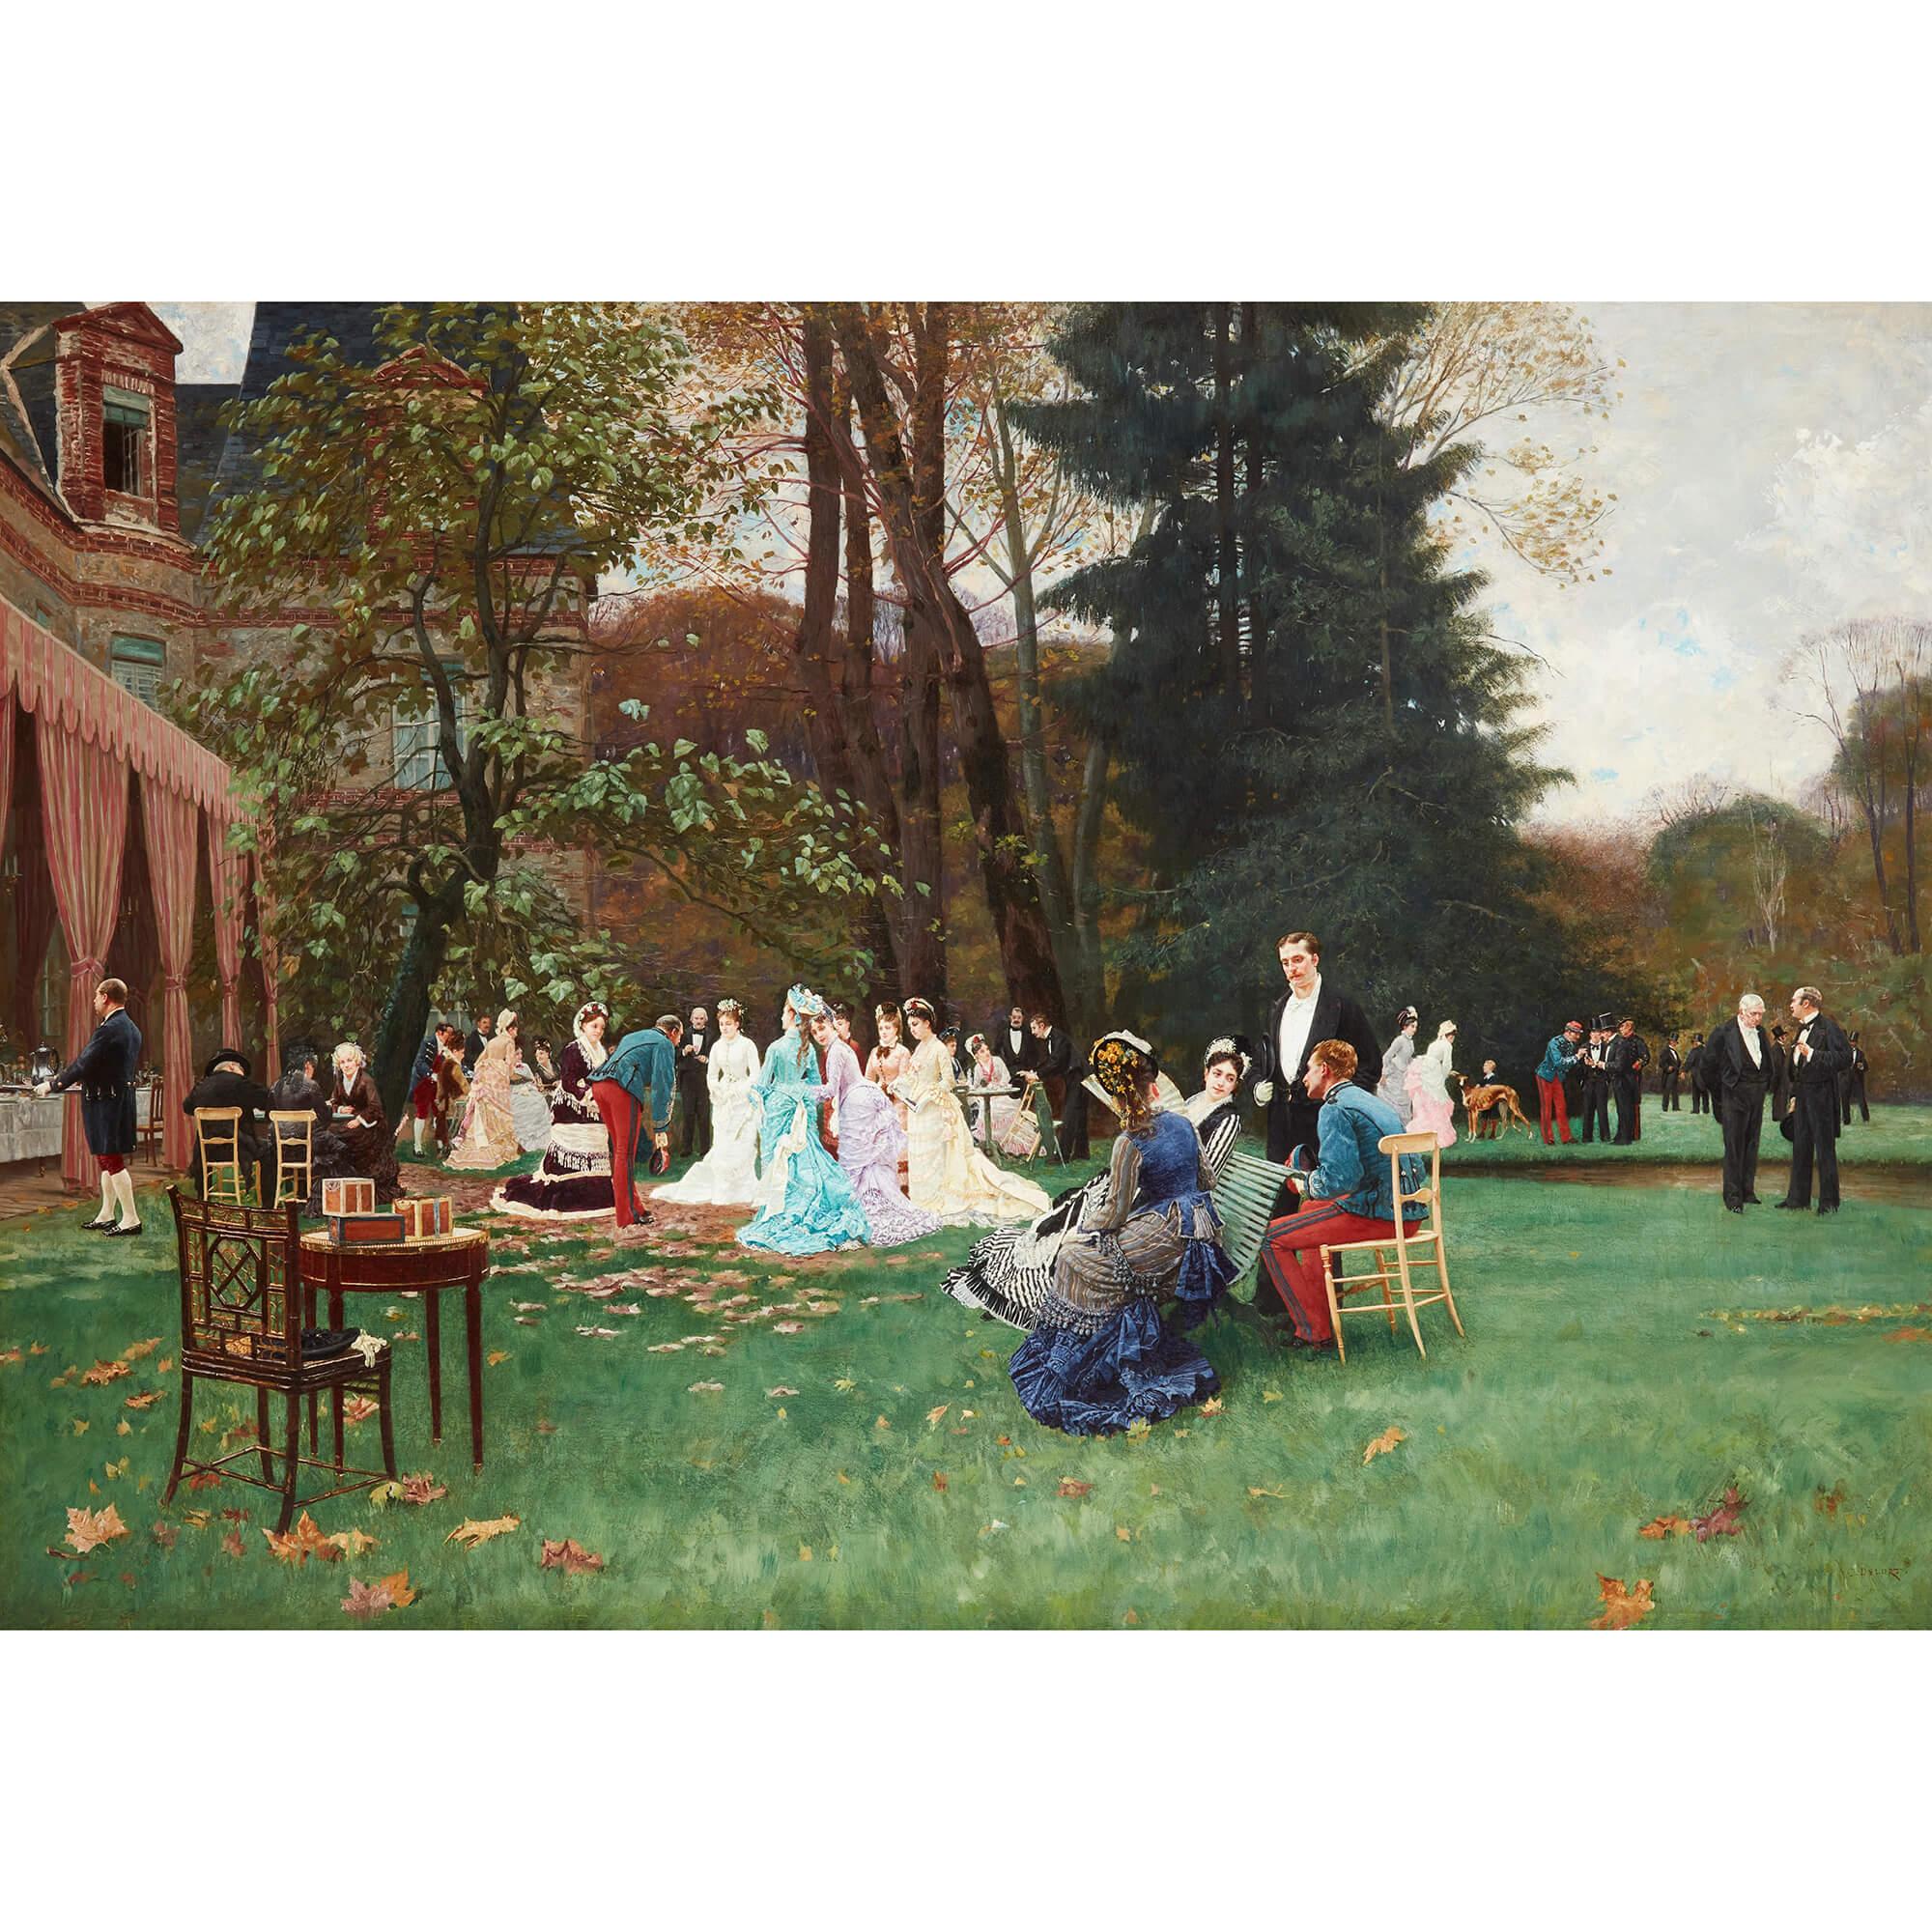 Large oil painting by C. Delort entitled ‘The Wedding, Fontainebleau’
French, Late 19th Century 
Canvas: Height 90cm, width 130cm 
Frame: Height 109cm, width 148cm, depth 7cm

This stunning large-scale oil painting is entitled ‘Les Noces,